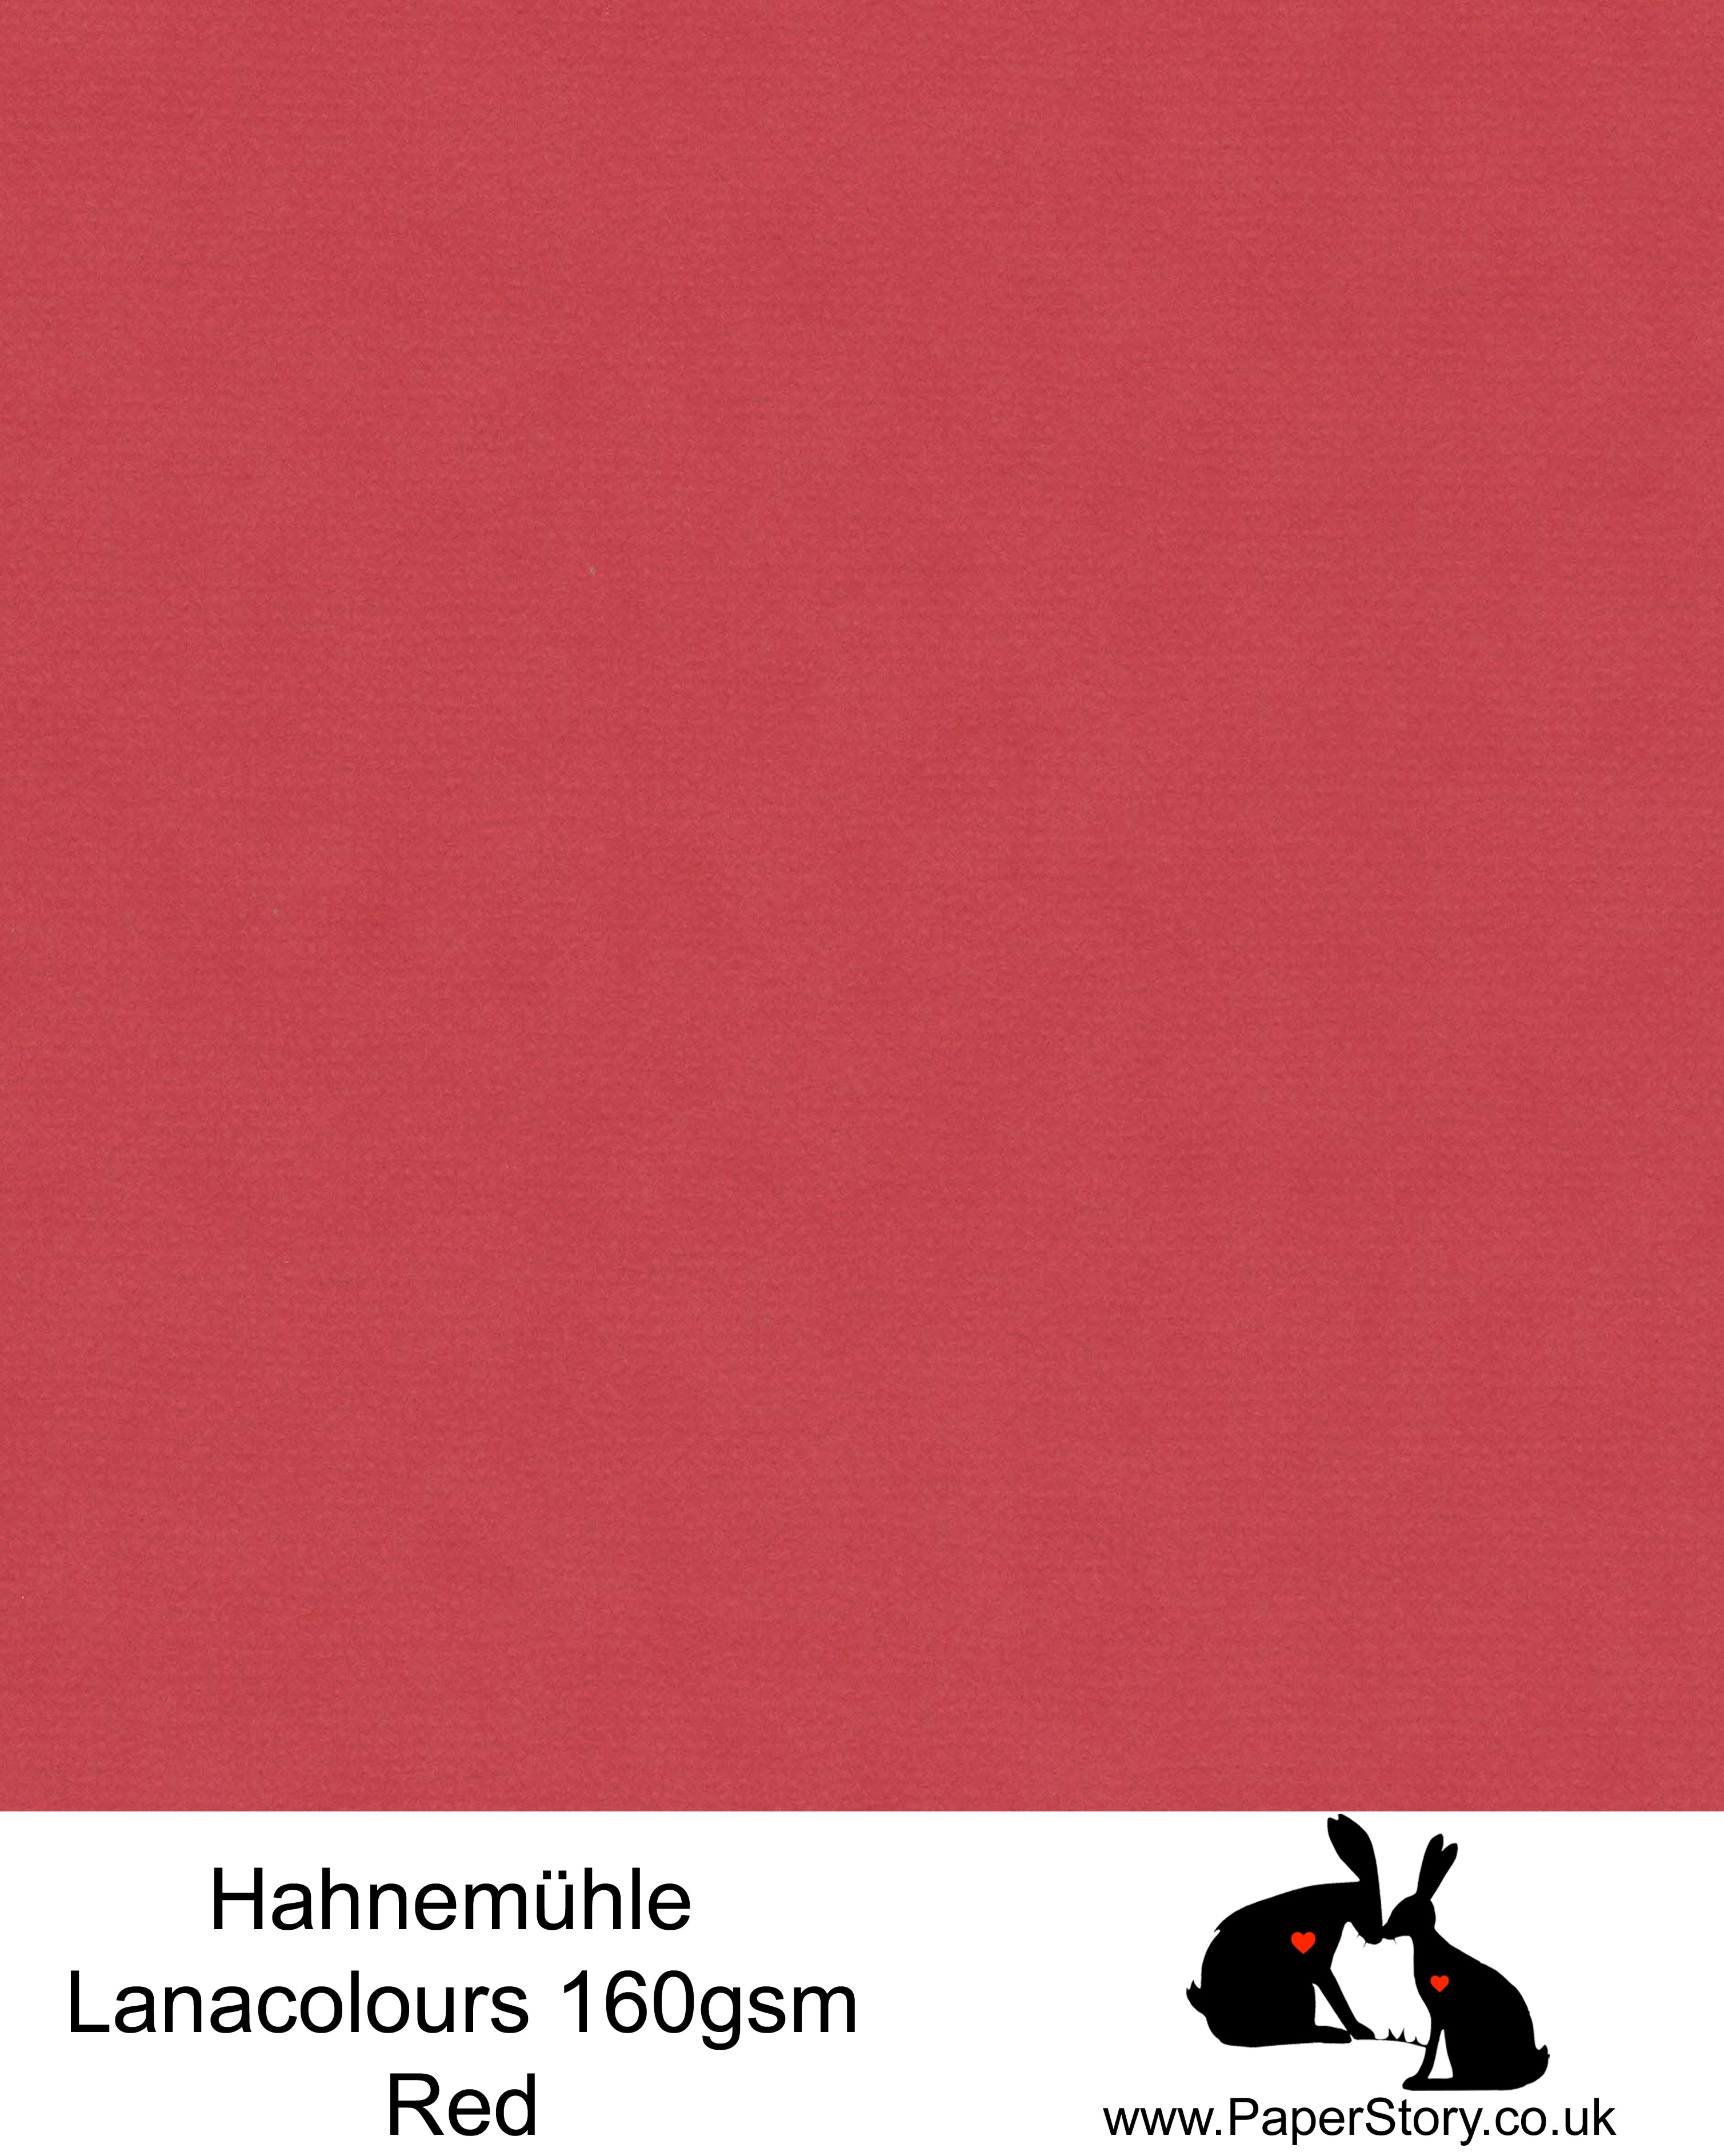 Hahnemühle Lana Colours red pastel hammered paper 160 gsm. Artist Premium Pastel and Papercutting Papers 160 gsm often described as hammered paper. This high quality artist paper